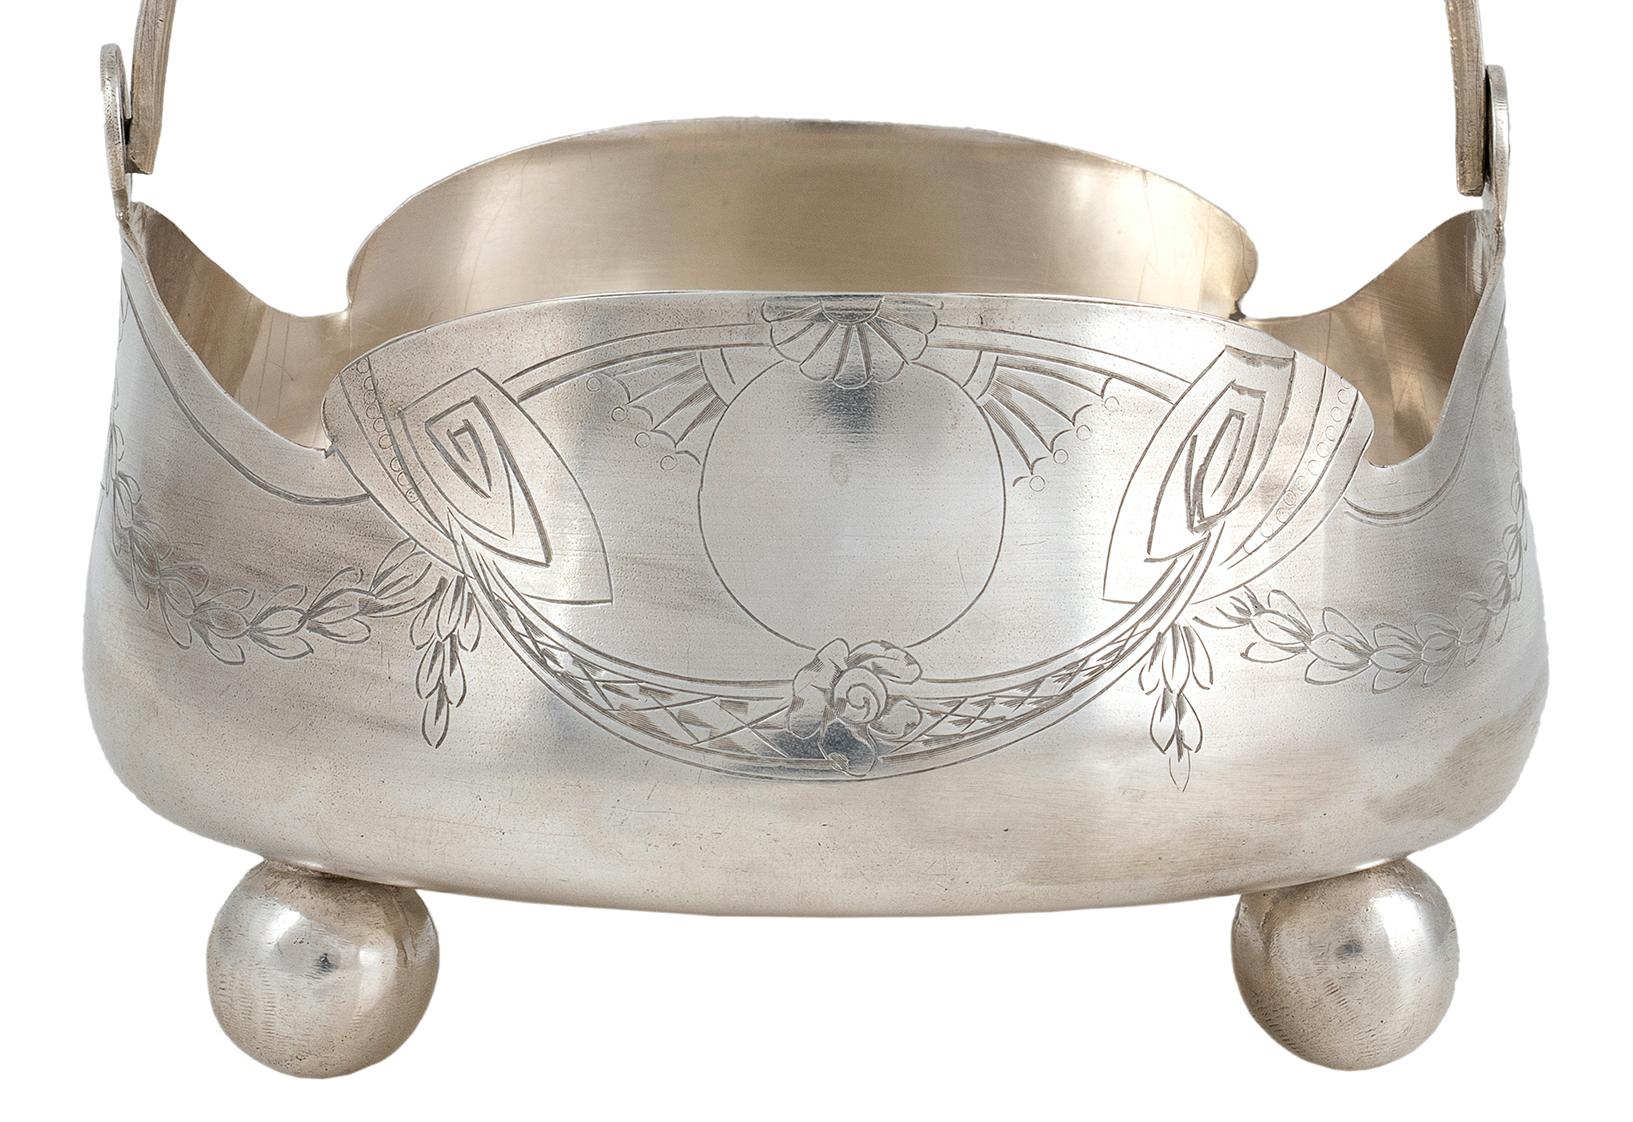 You are admiring a precious silver sugar bowl, realized in Moscow during the years 1908-1917.

Made of 875/1000 silver. Weight: 0.166 Kgs. Height with handle 13.5 cm.

This splendid sugar bowl is characterized by a circular body resting on three